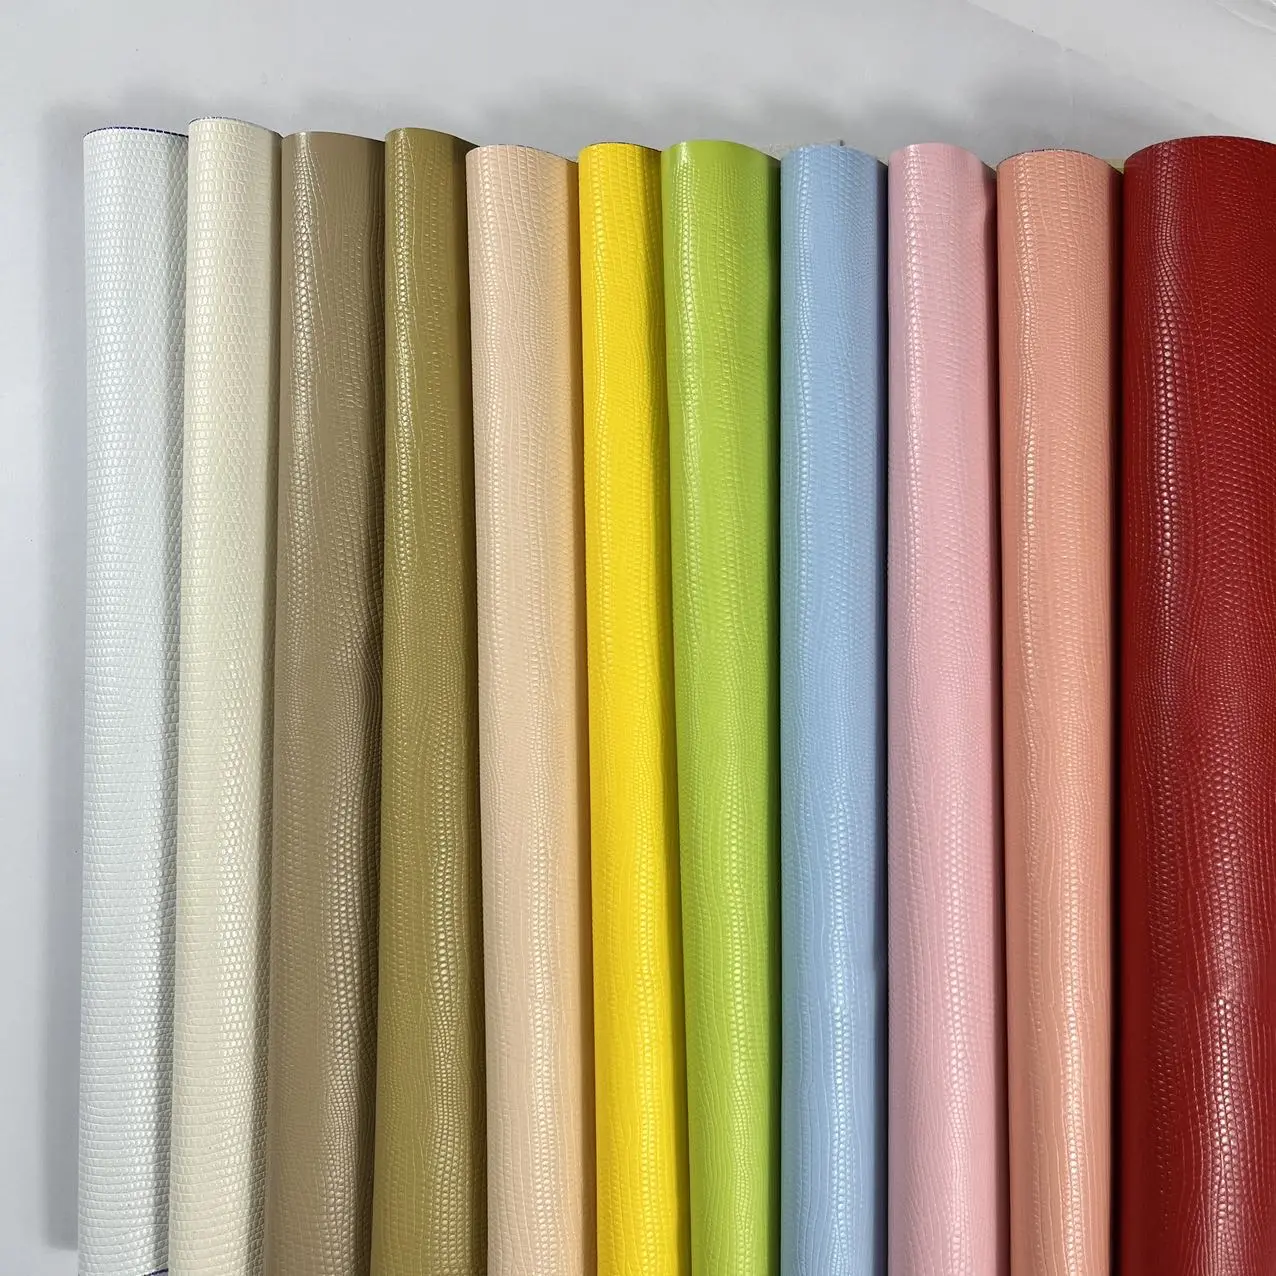 Hot selling products special materials animal grain plain PVC leather for shoes handbags